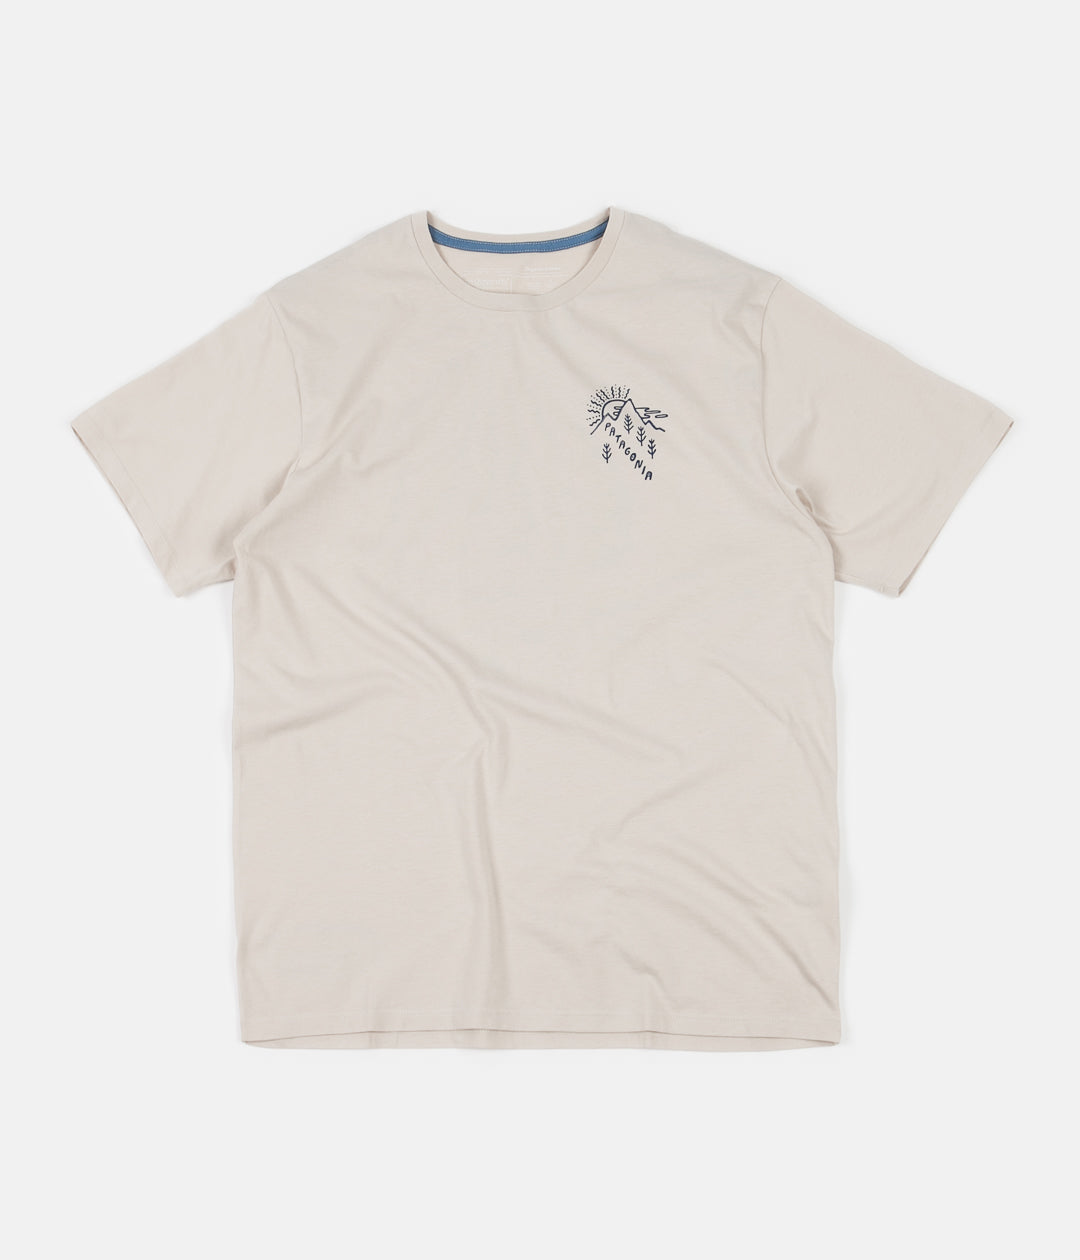 Warehouse scoop back t-shirt in white